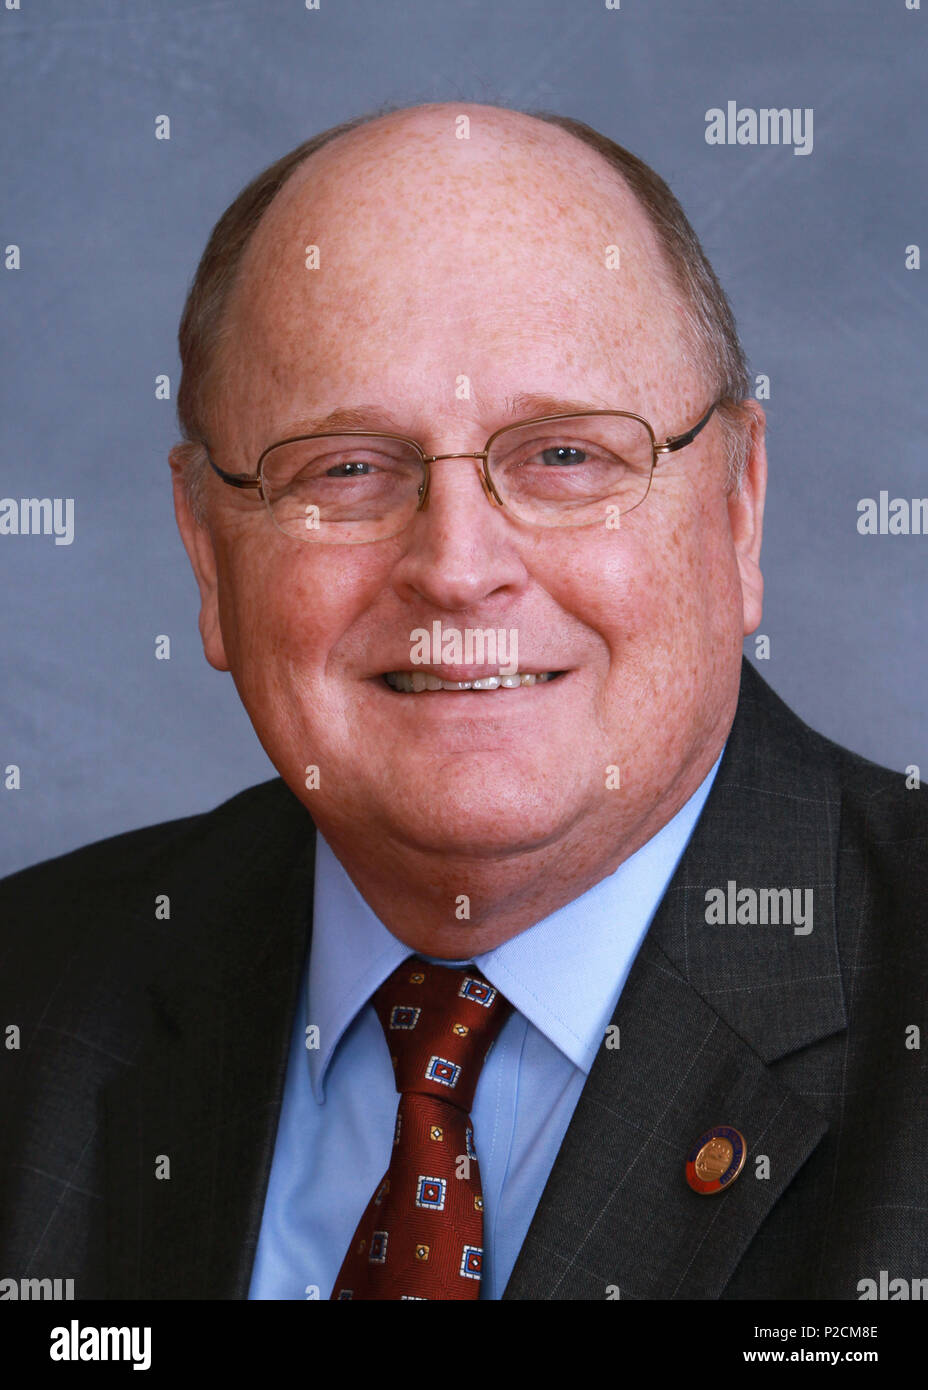 . English: This is the Dan Ingle profile photo on the North Carolina General Assembly website for the 2011-2012 legislative session. 15 February 2011. State of North Carolina 15 Dan Ingle NCGA 2012 Stock Photo